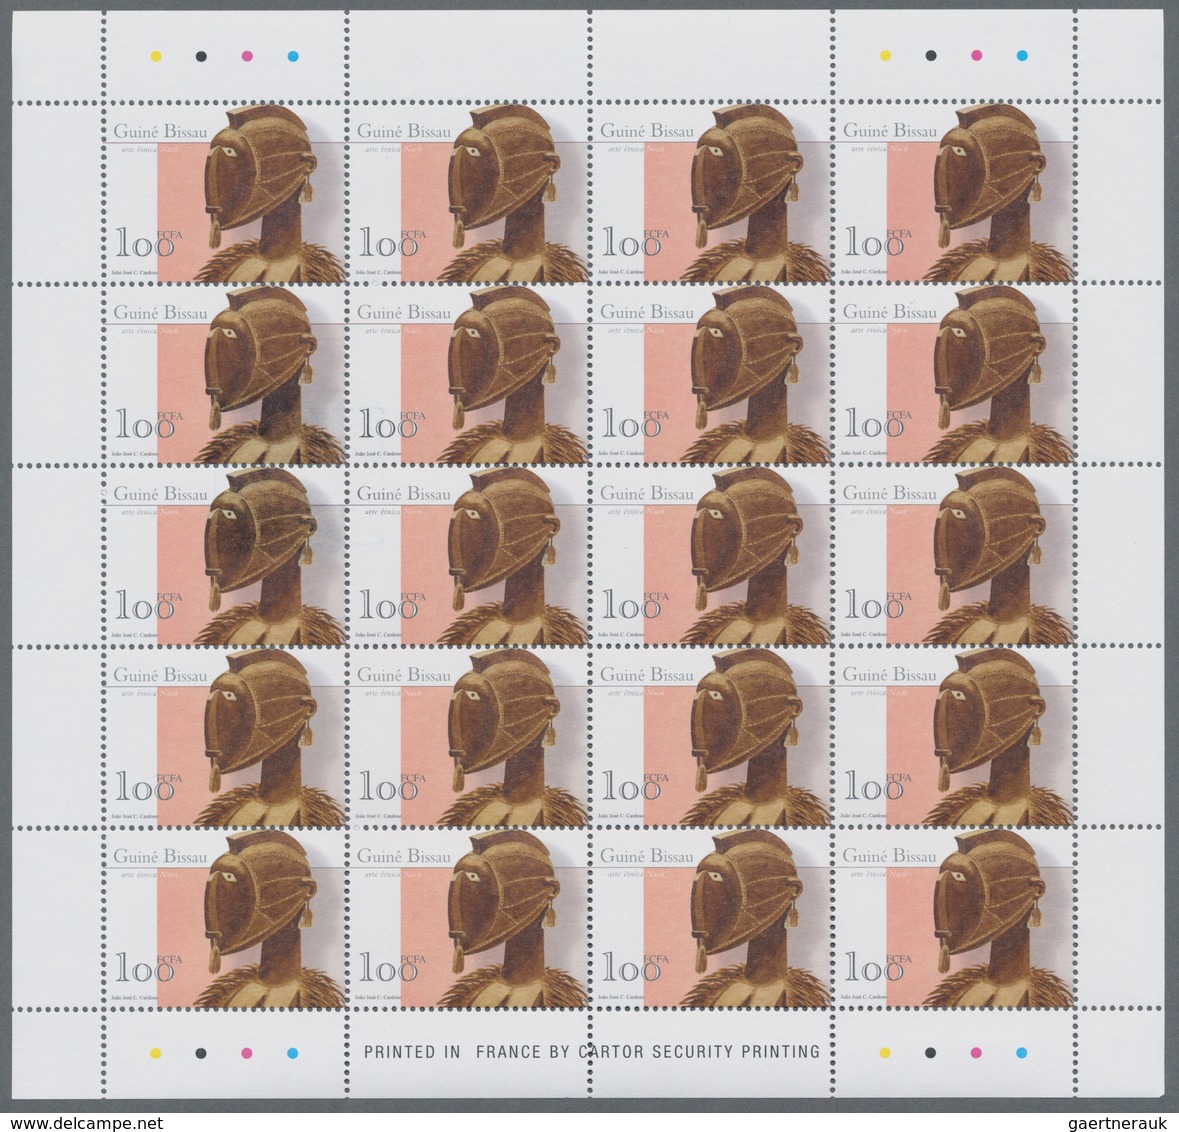 Guinea-Bissau: 2001, ARTS AND CRAFTS, Complete Set Of Five In Miniature Sheets With 20 Stamps Each, - Guinea-Bissau